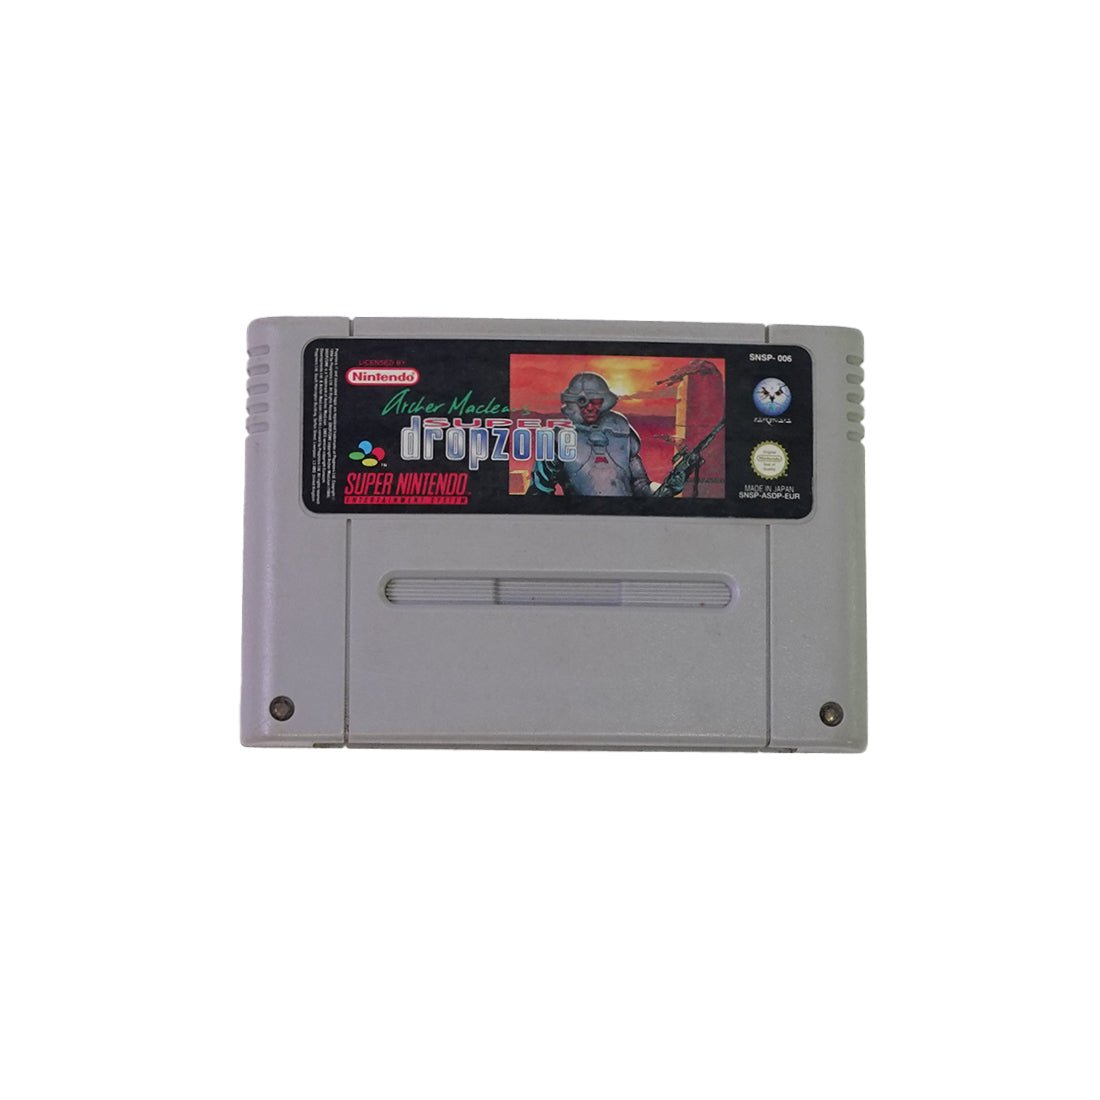 (Pre-Owned) Archer Maclean's Super Dropzone Game - SNES - ريترو - Store 974 | ستور ٩٧٤